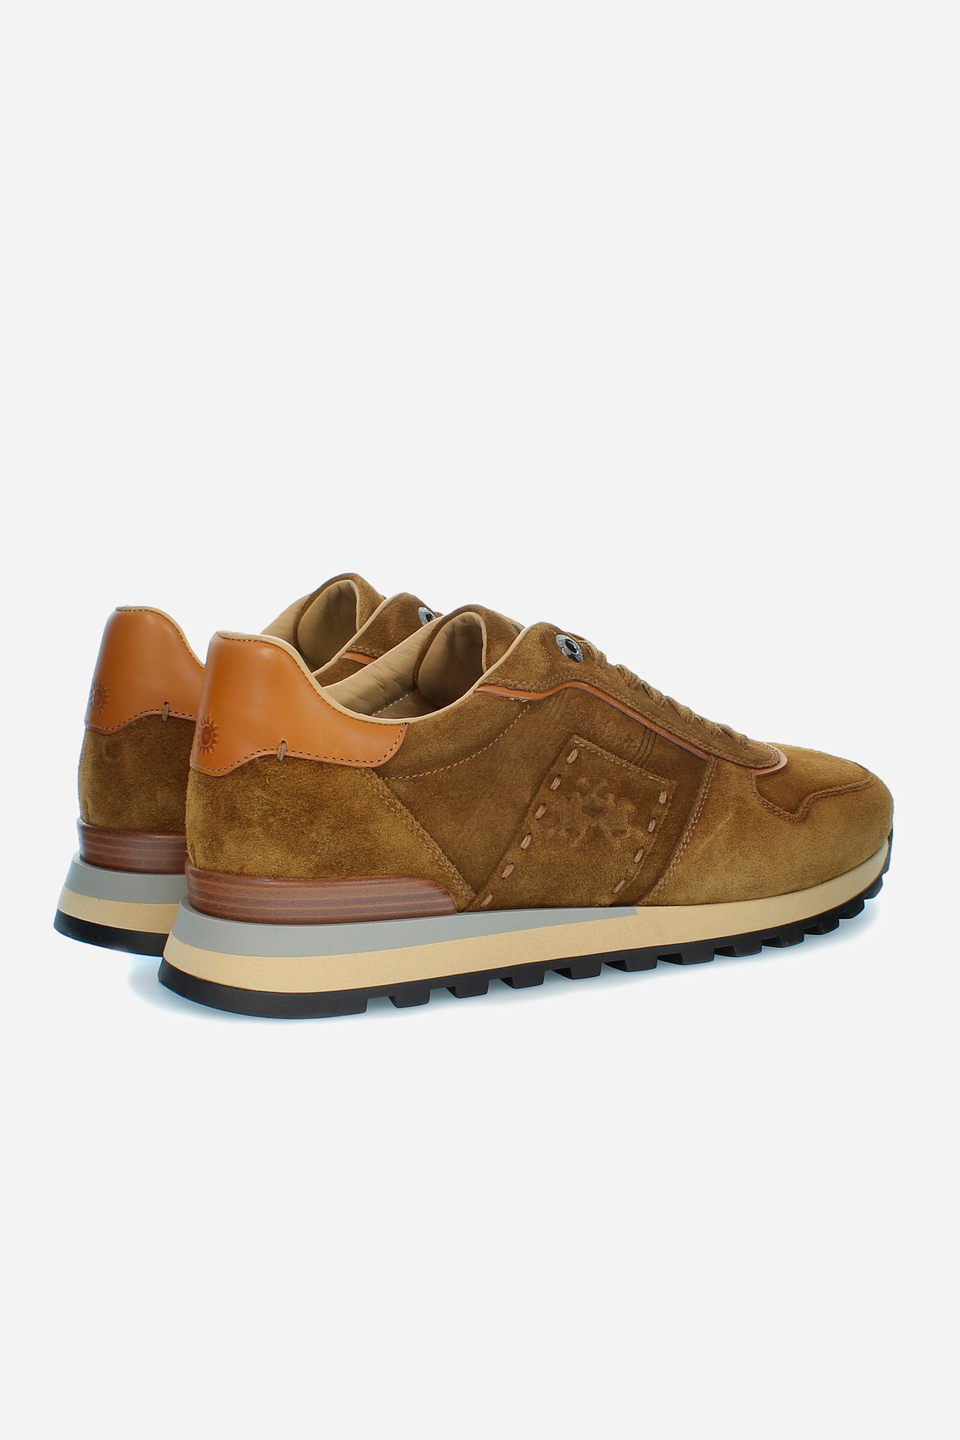 Men’s sneaker in suede and leather inserts | La Martina - Official Online Shop